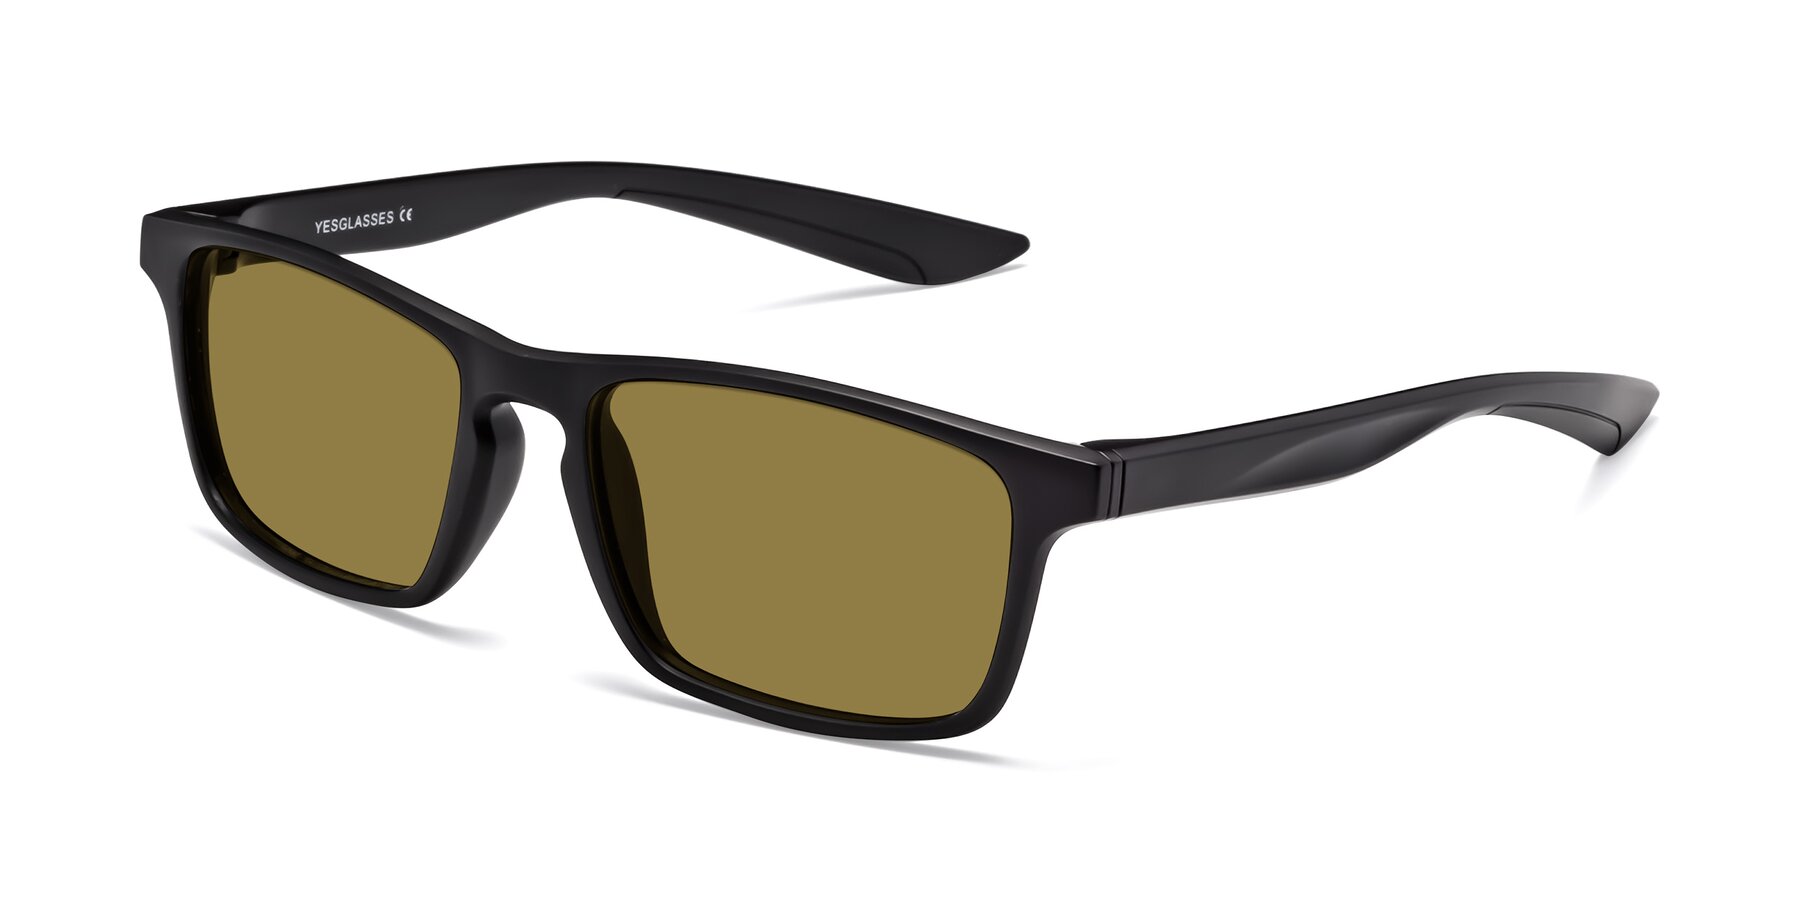 Angle of Passion in Matte Black with Brown Polarized Lenses